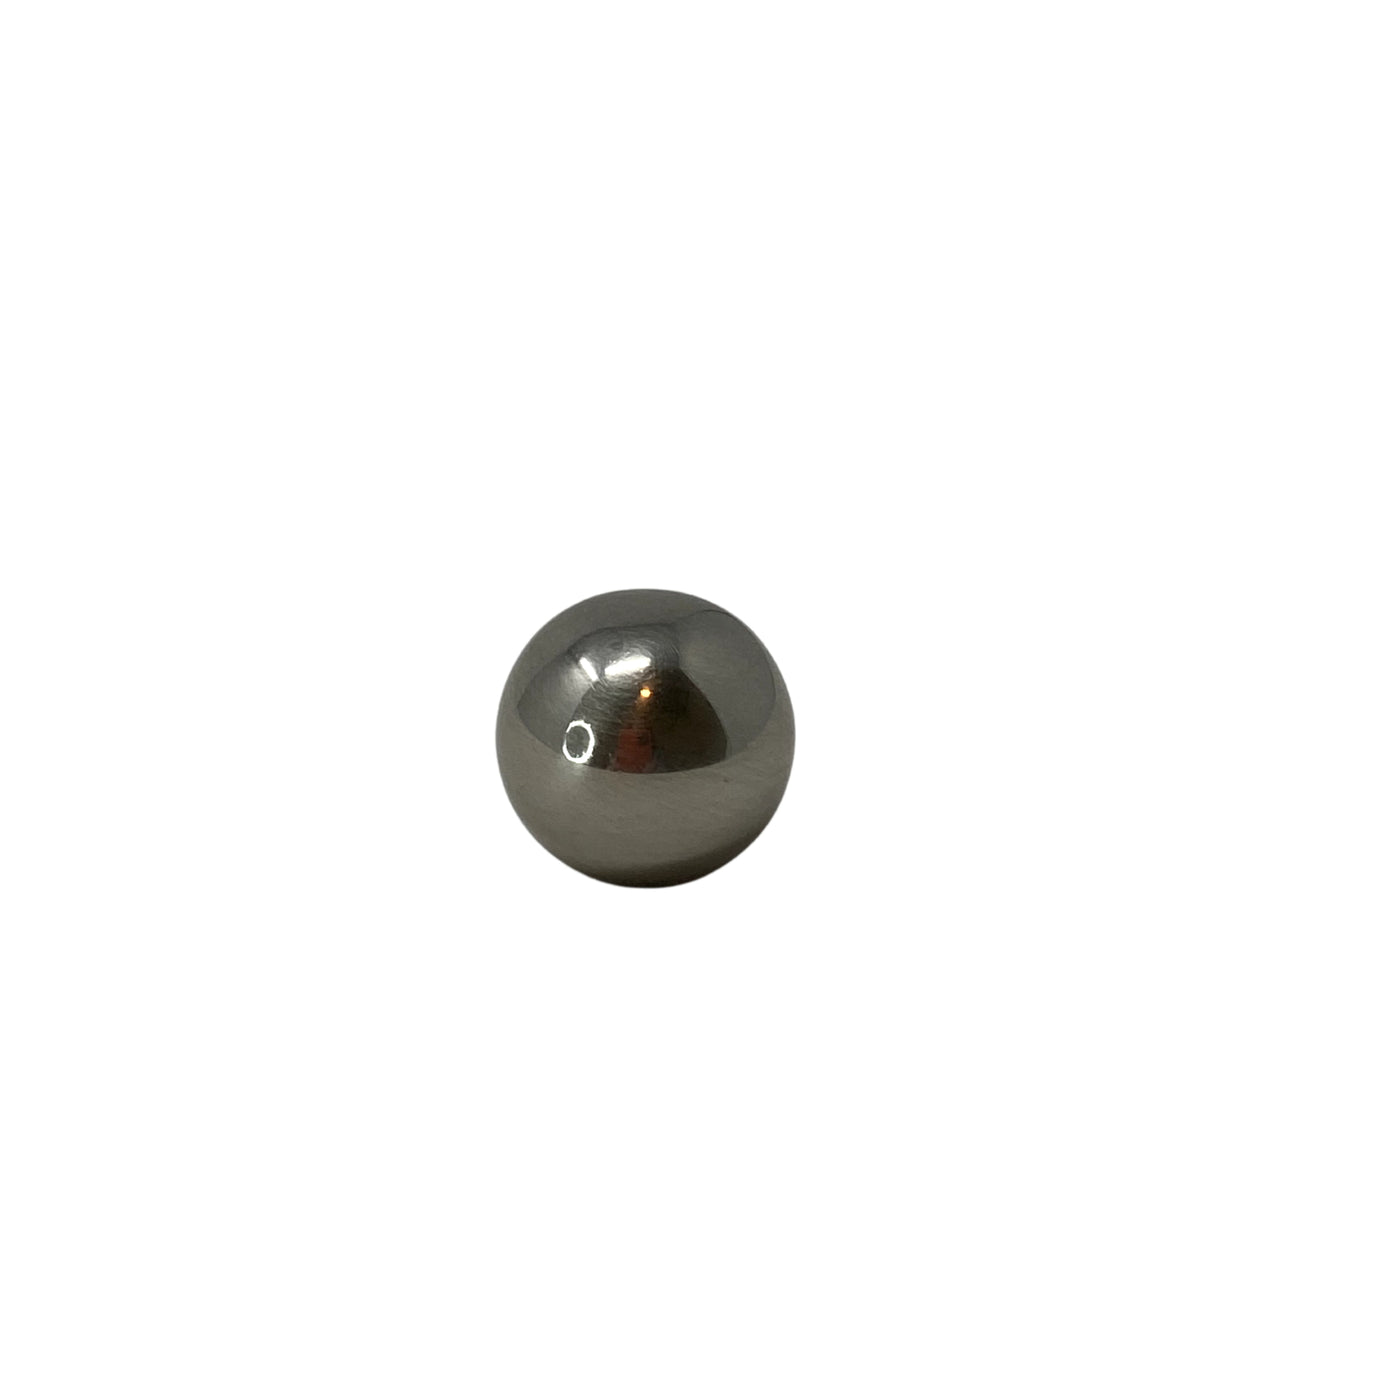 Polished nickel round ball finial